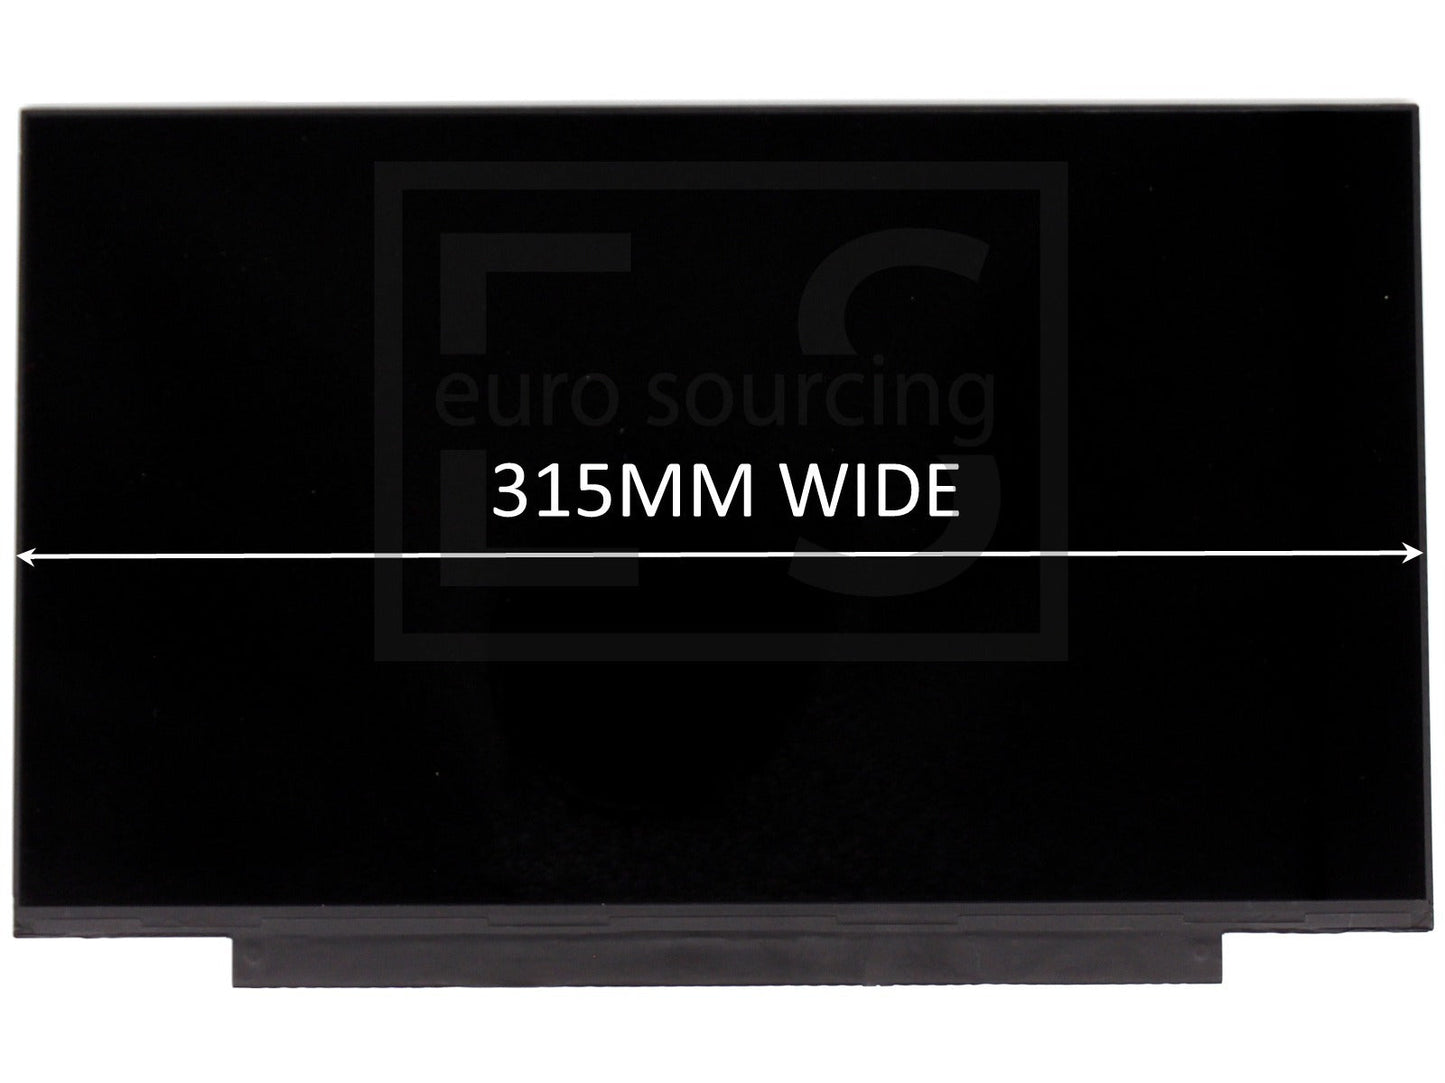 Replacement For N140HGE-EA1 14" LED LCD Screen Matte FHD Non-IPS 315MM Display Panel -Without Brackets Compatible With ACER SWIFT 3 SF314-43-R3N3